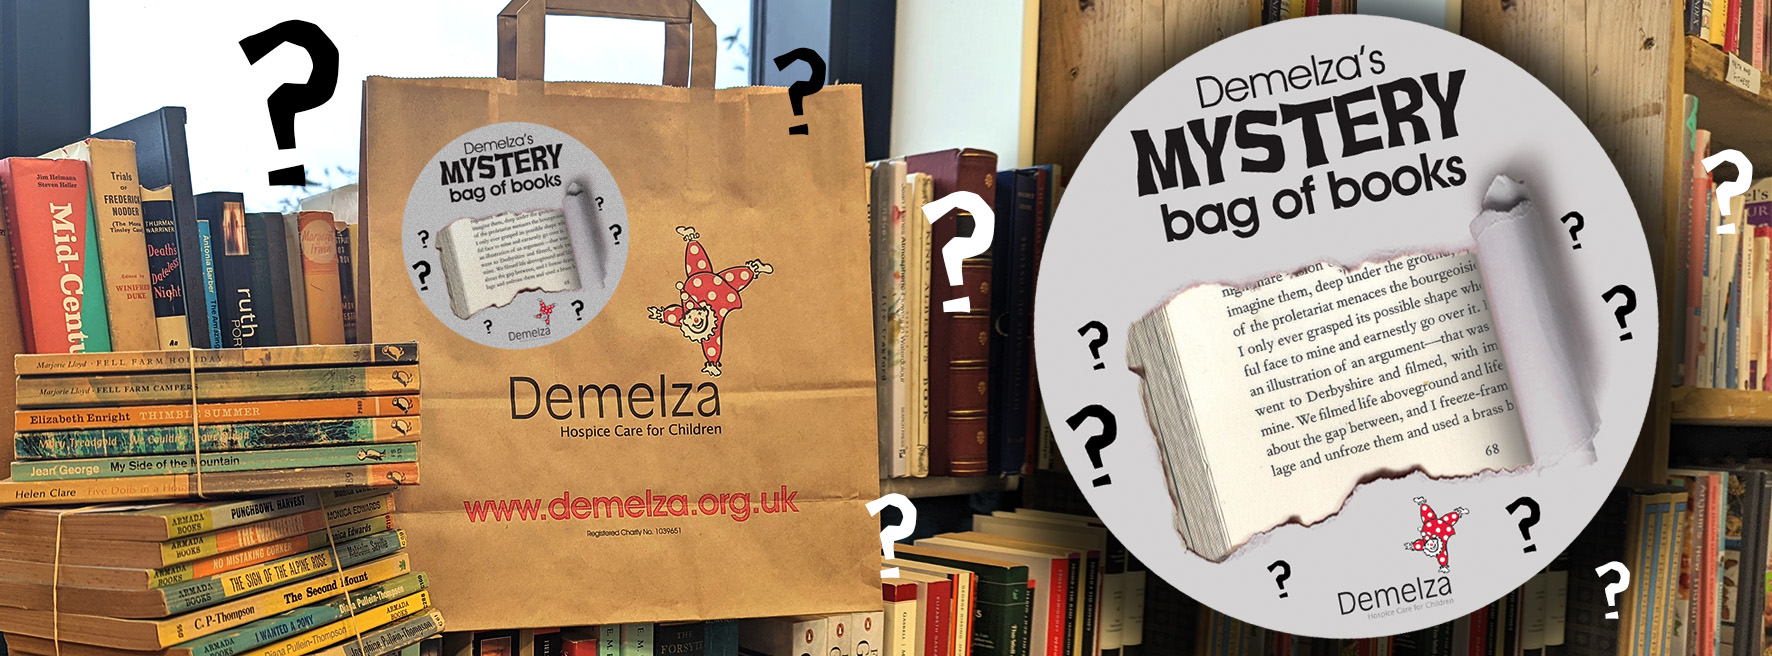 Demelza's Mystery Bag of Books next to piles of books in shop